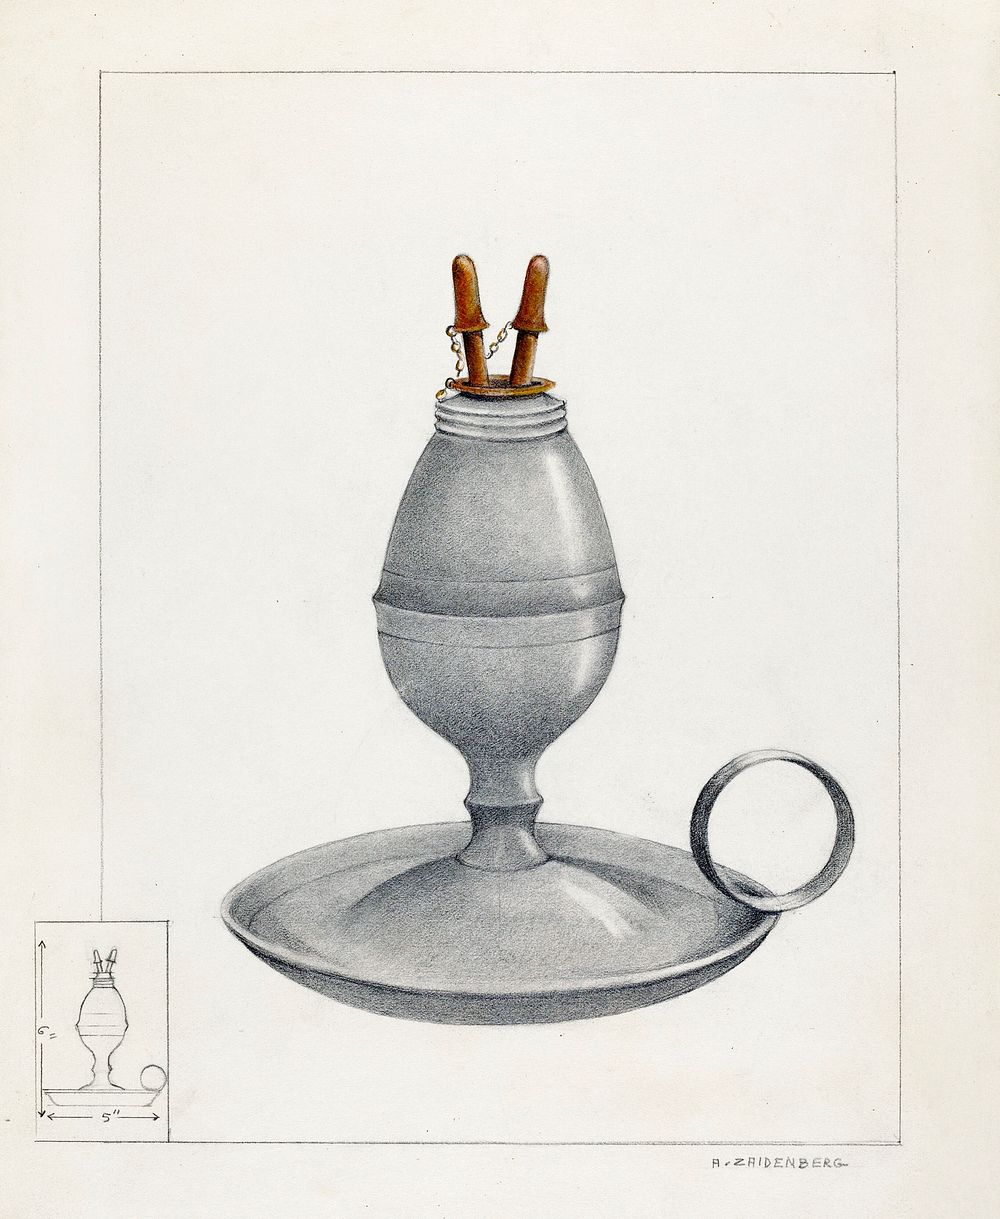 Chamber Lamp (ca.1936) by A. Zaidenberg. Original from The National Gallery of Art. Digitally enhanced by rawpixel.